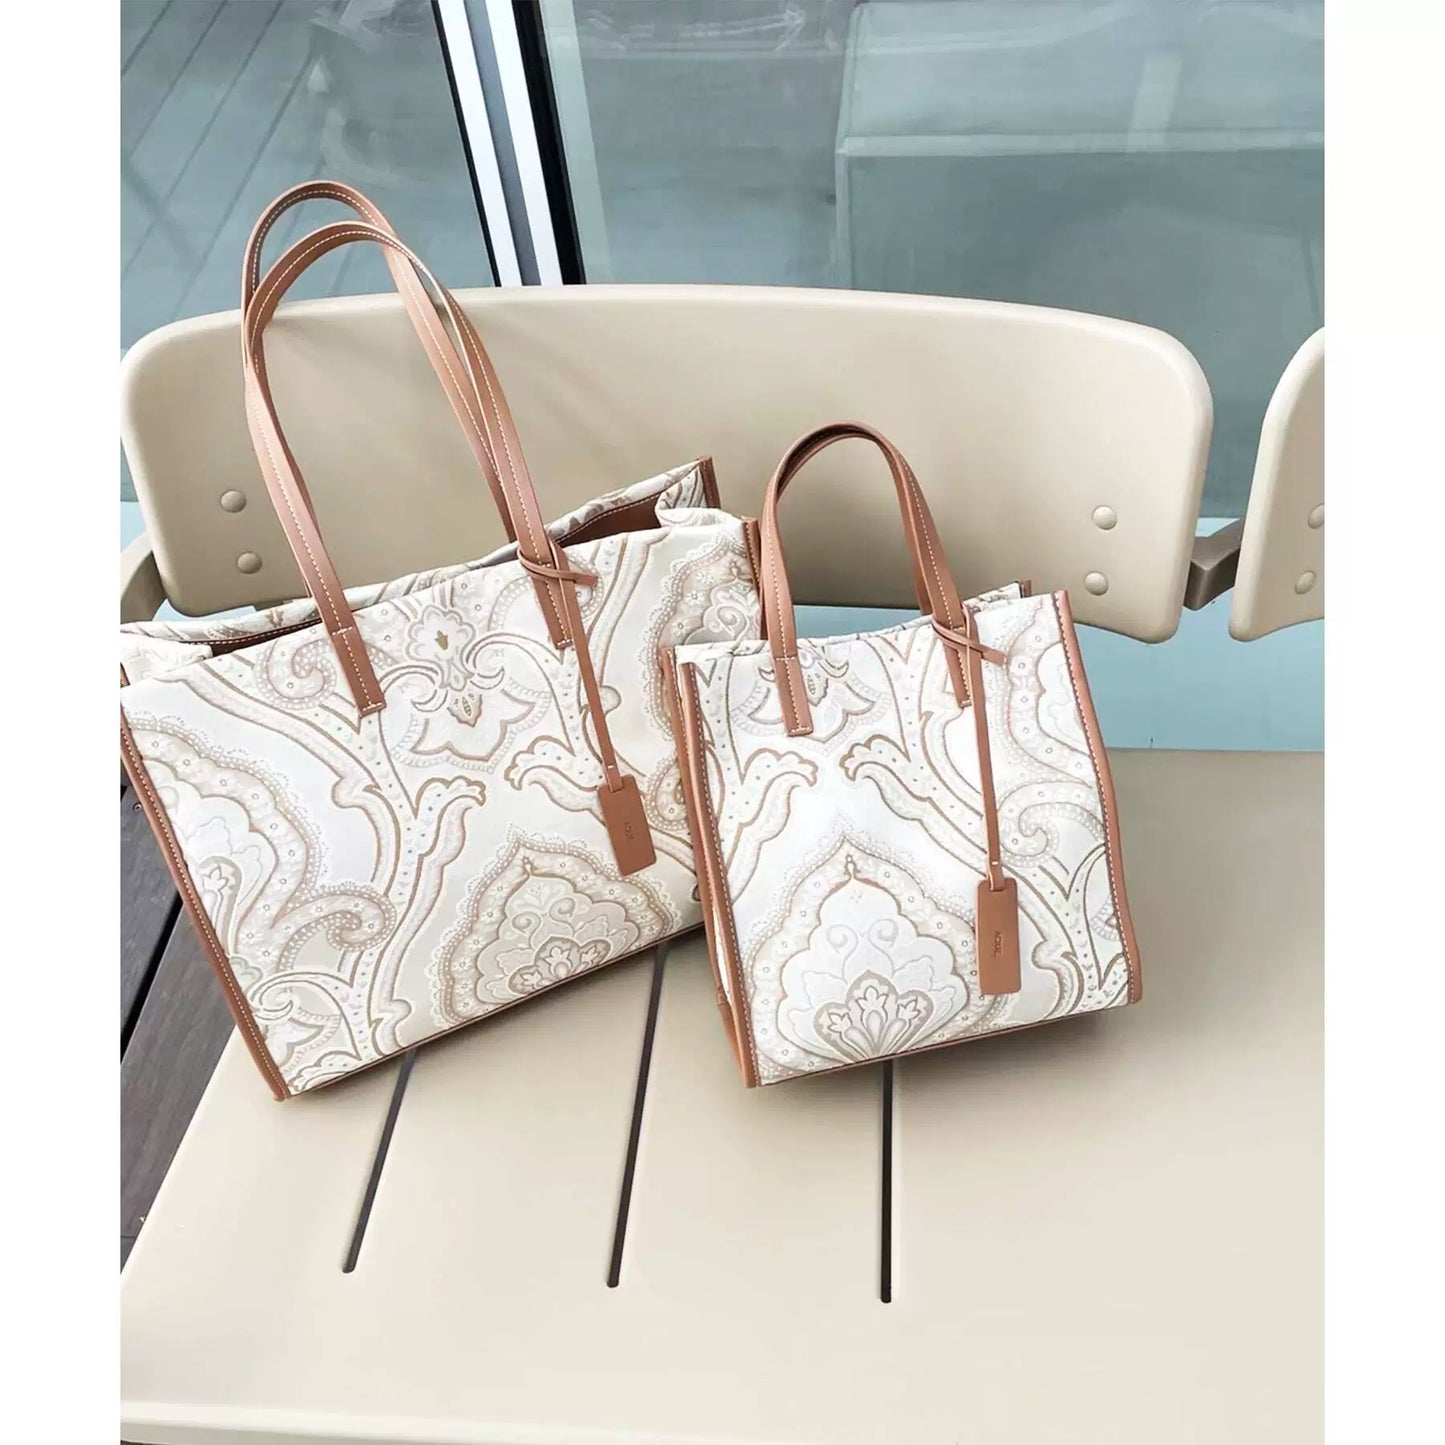 Japanese  paisley pattern tote bag (Shipping not included)